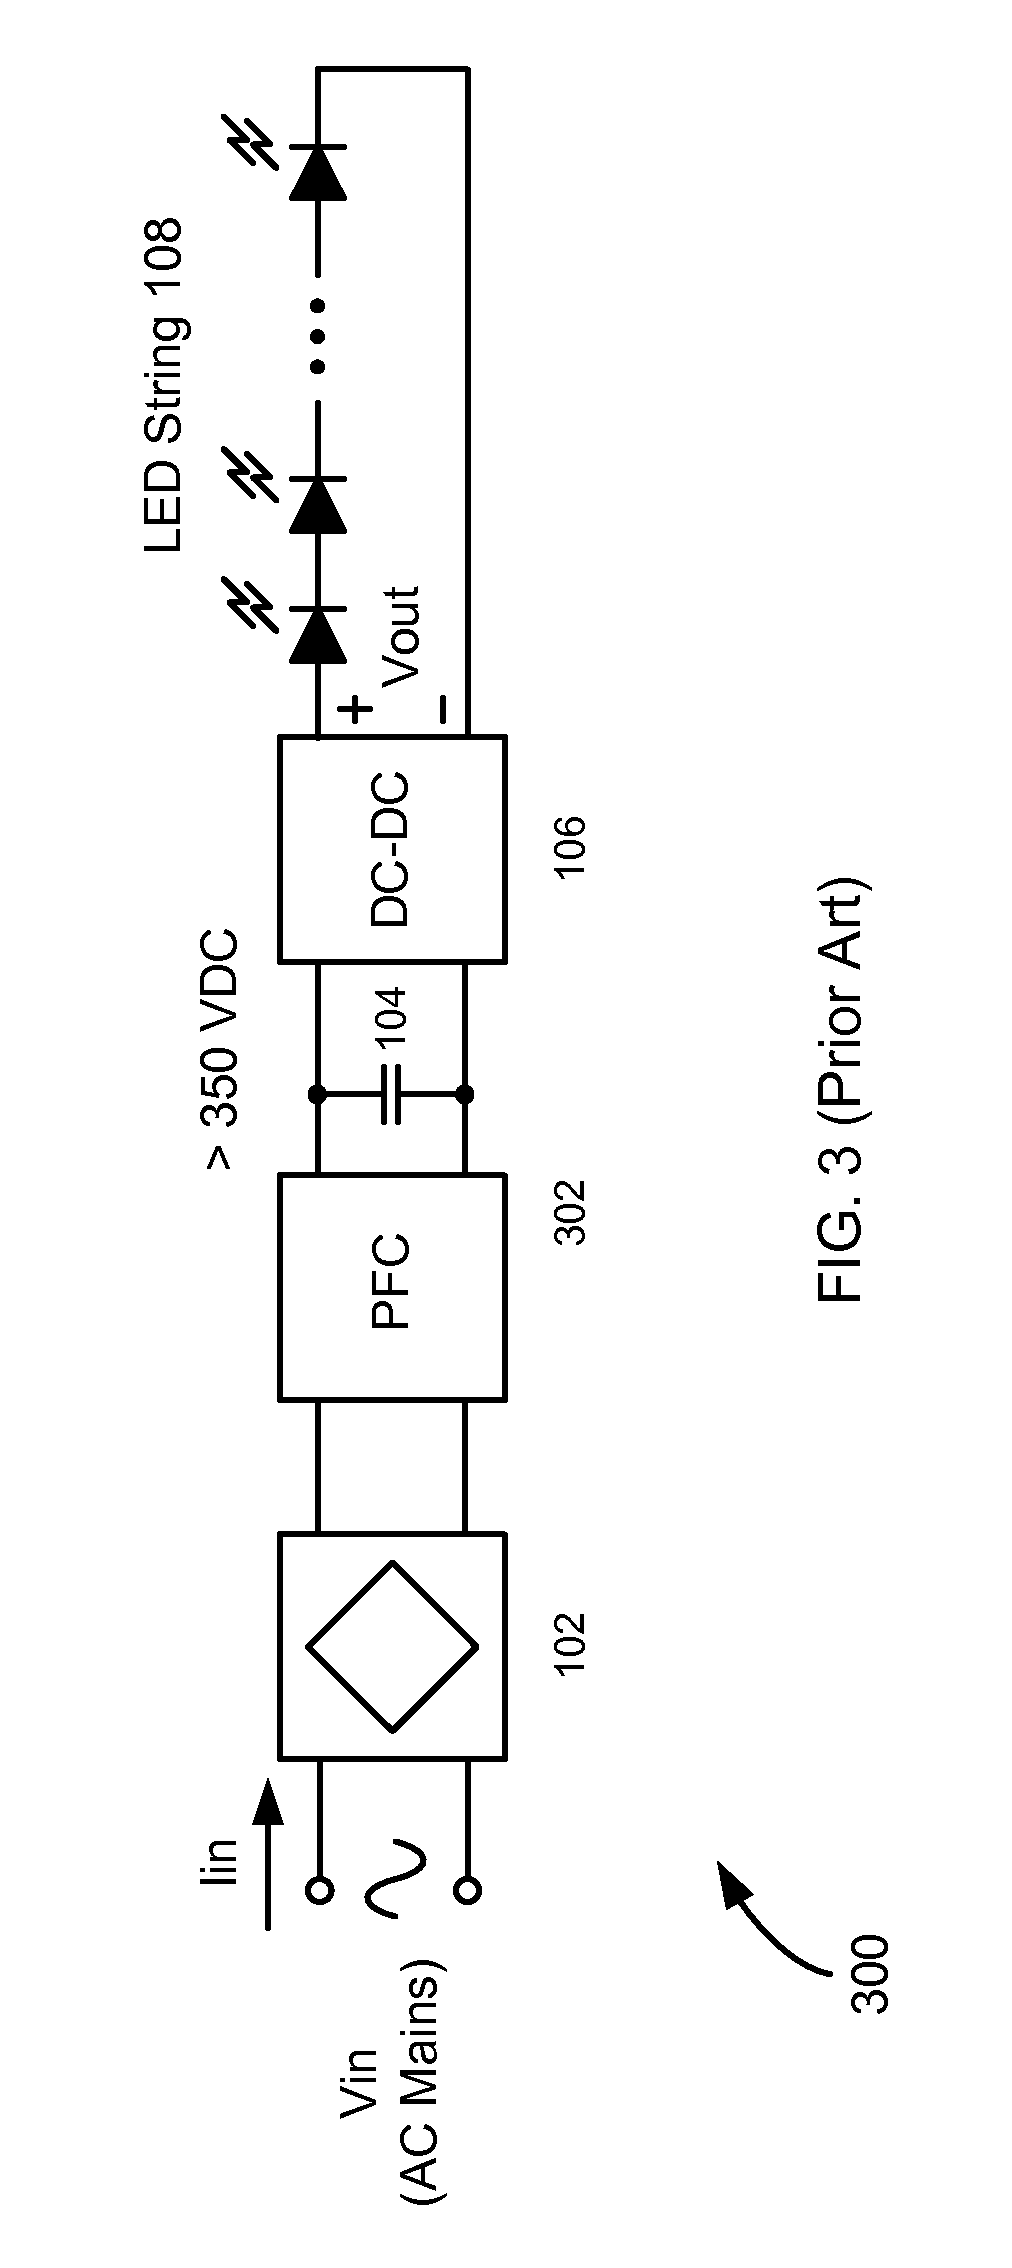 Power Conversion and Control Systems and Methods for Solid-State Lighting